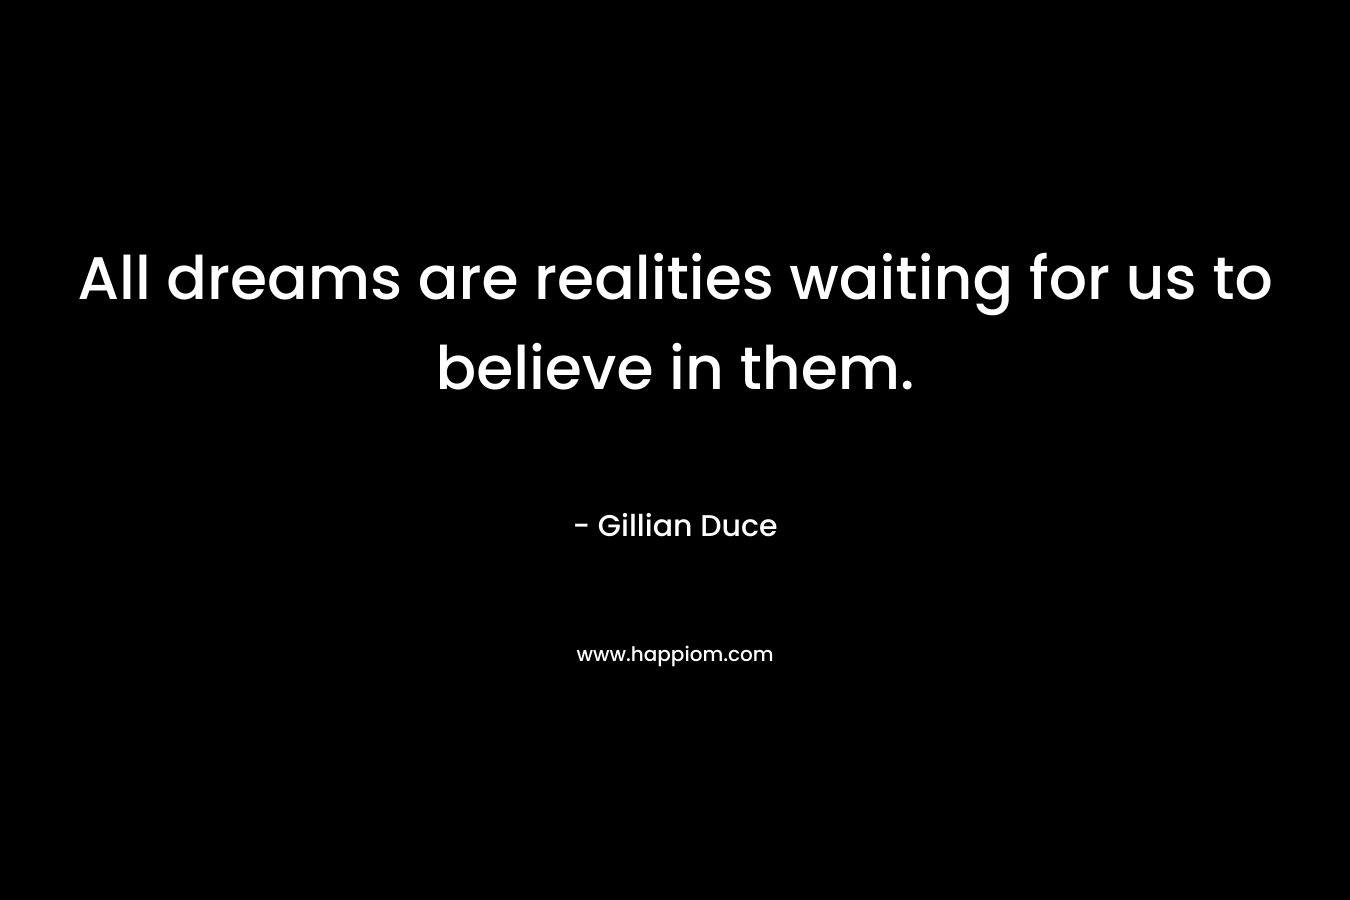 All dreams are realities waiting for us to believe in them.